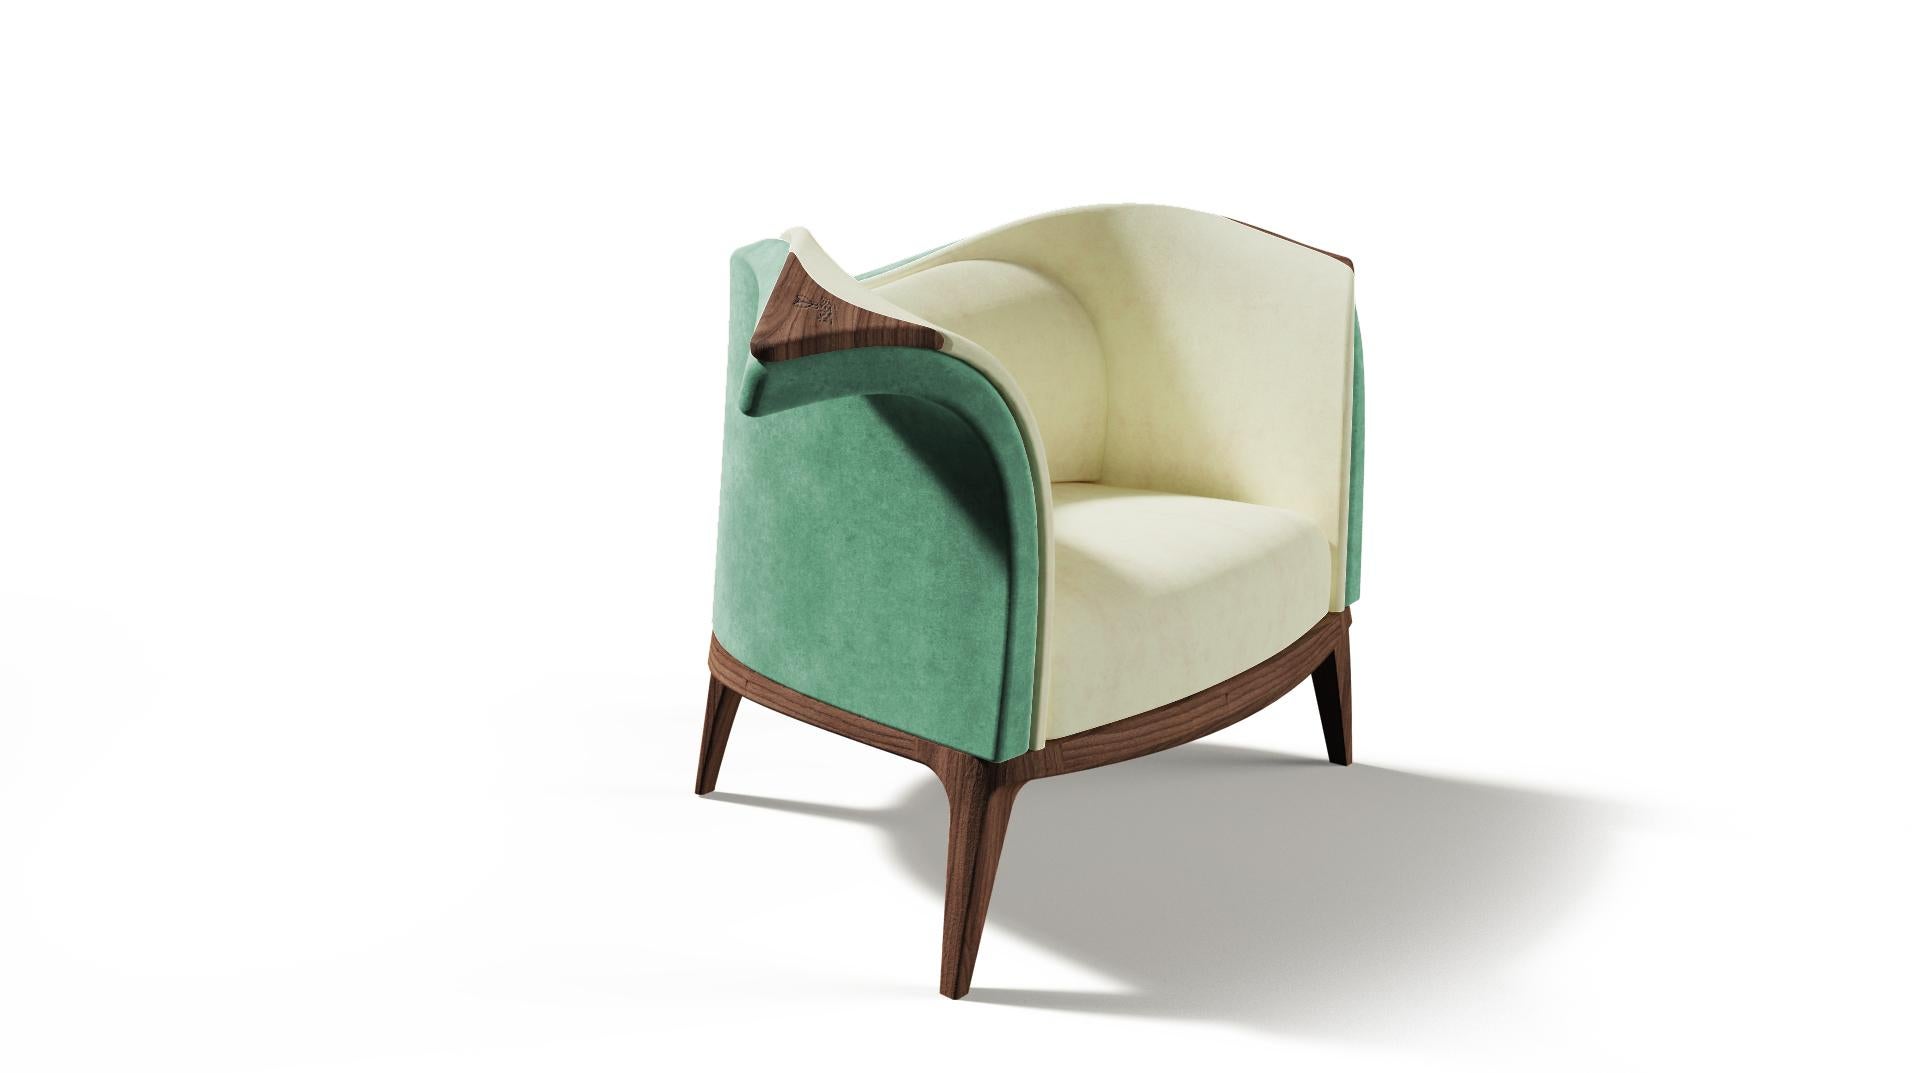 This armchair inspired by 